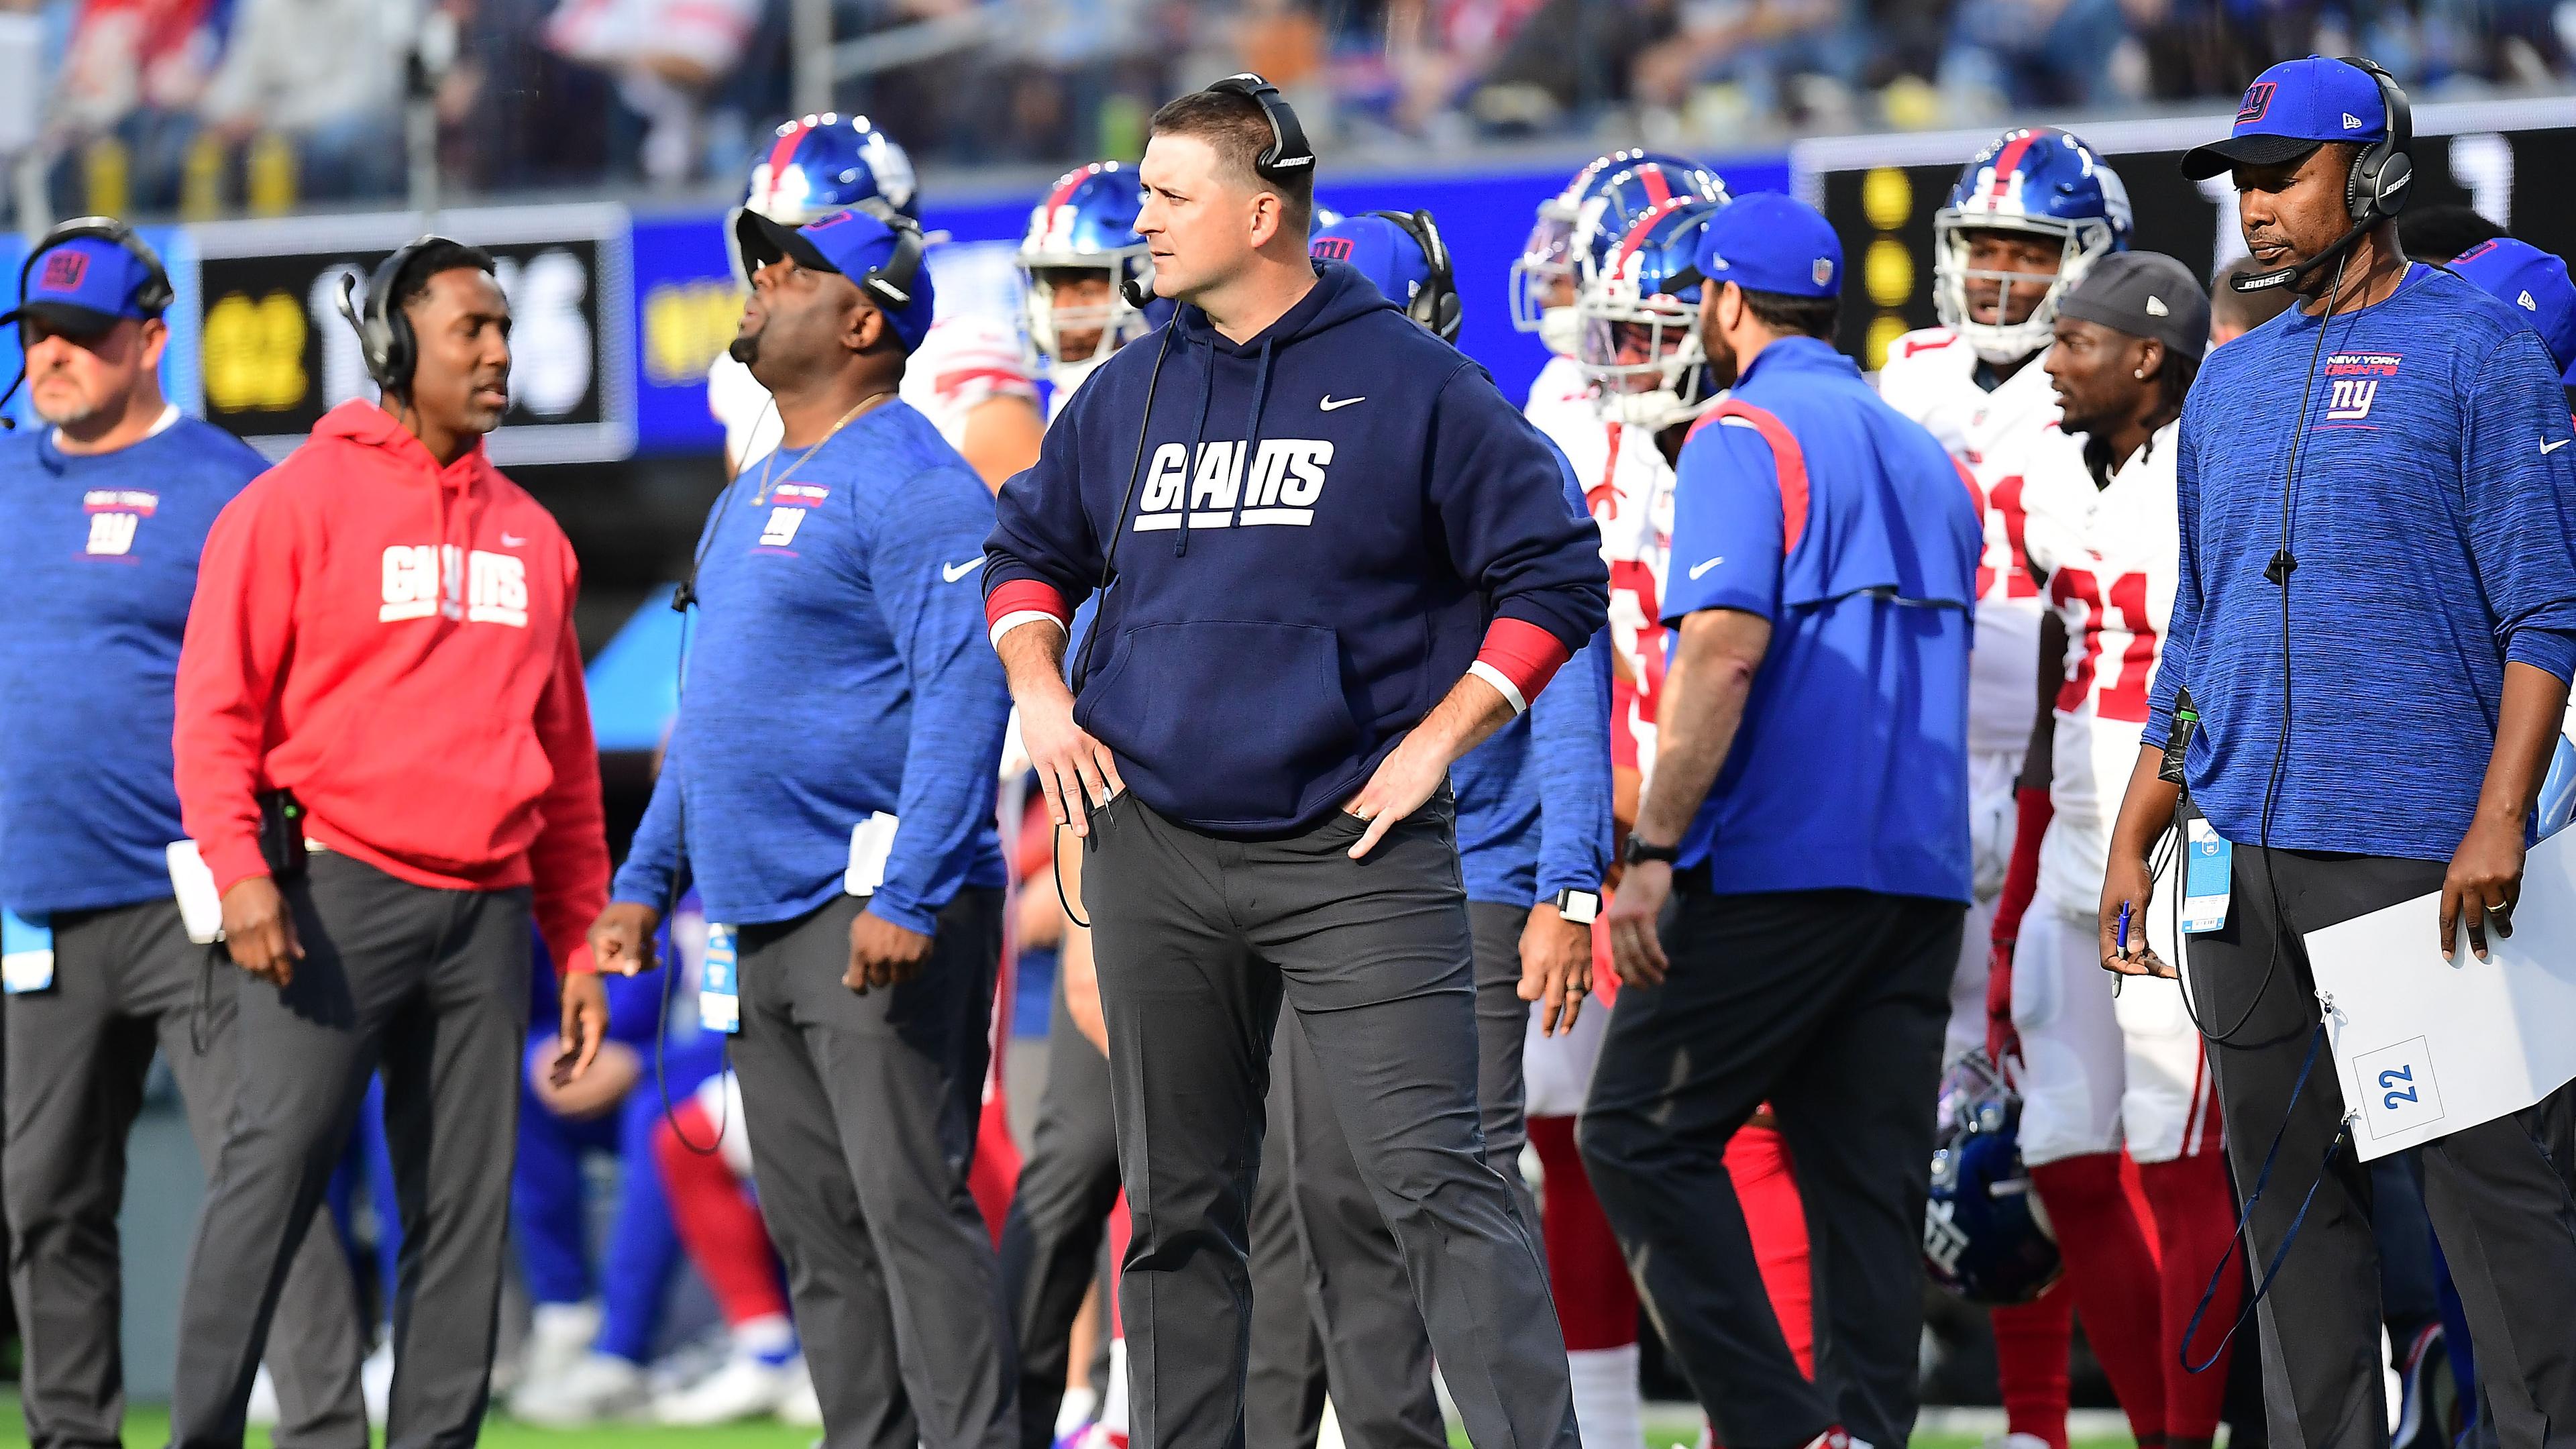 Dec 12, 2021; Inglewood, California, USA; New York Giants head coach Joe Judge watches game action against the Los Angeles Chargers during the first half at SoFi Stadium. / Gary A. Vasquez-USA TODAY Sports